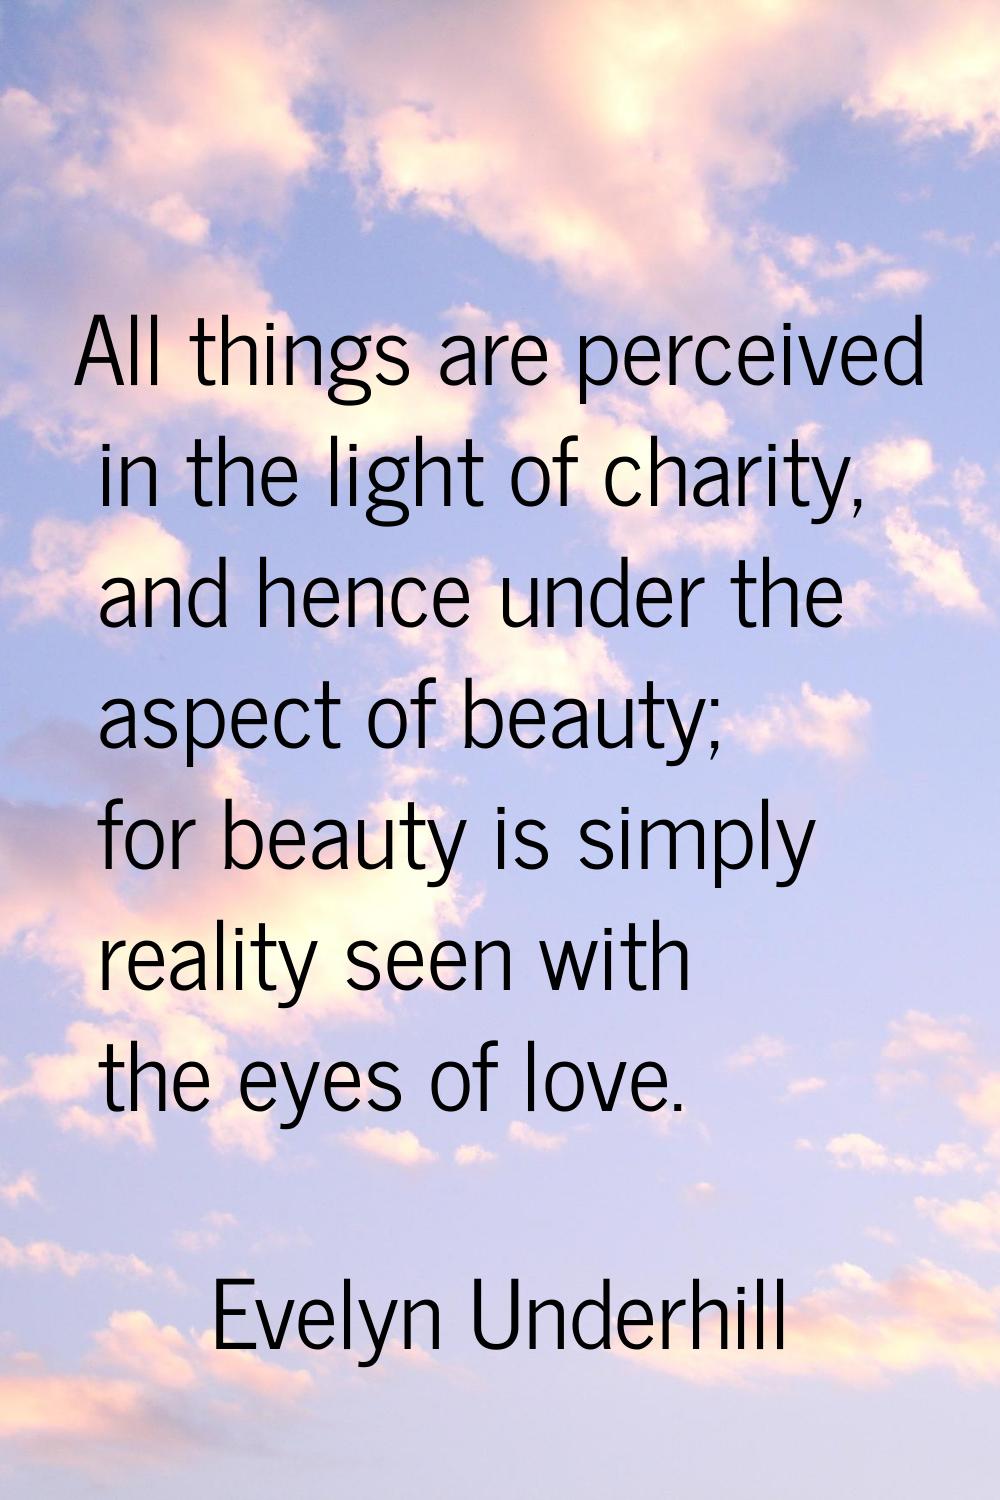 All things are perceived in the light of charity, and hence under the aspect of beauty; for beauty 